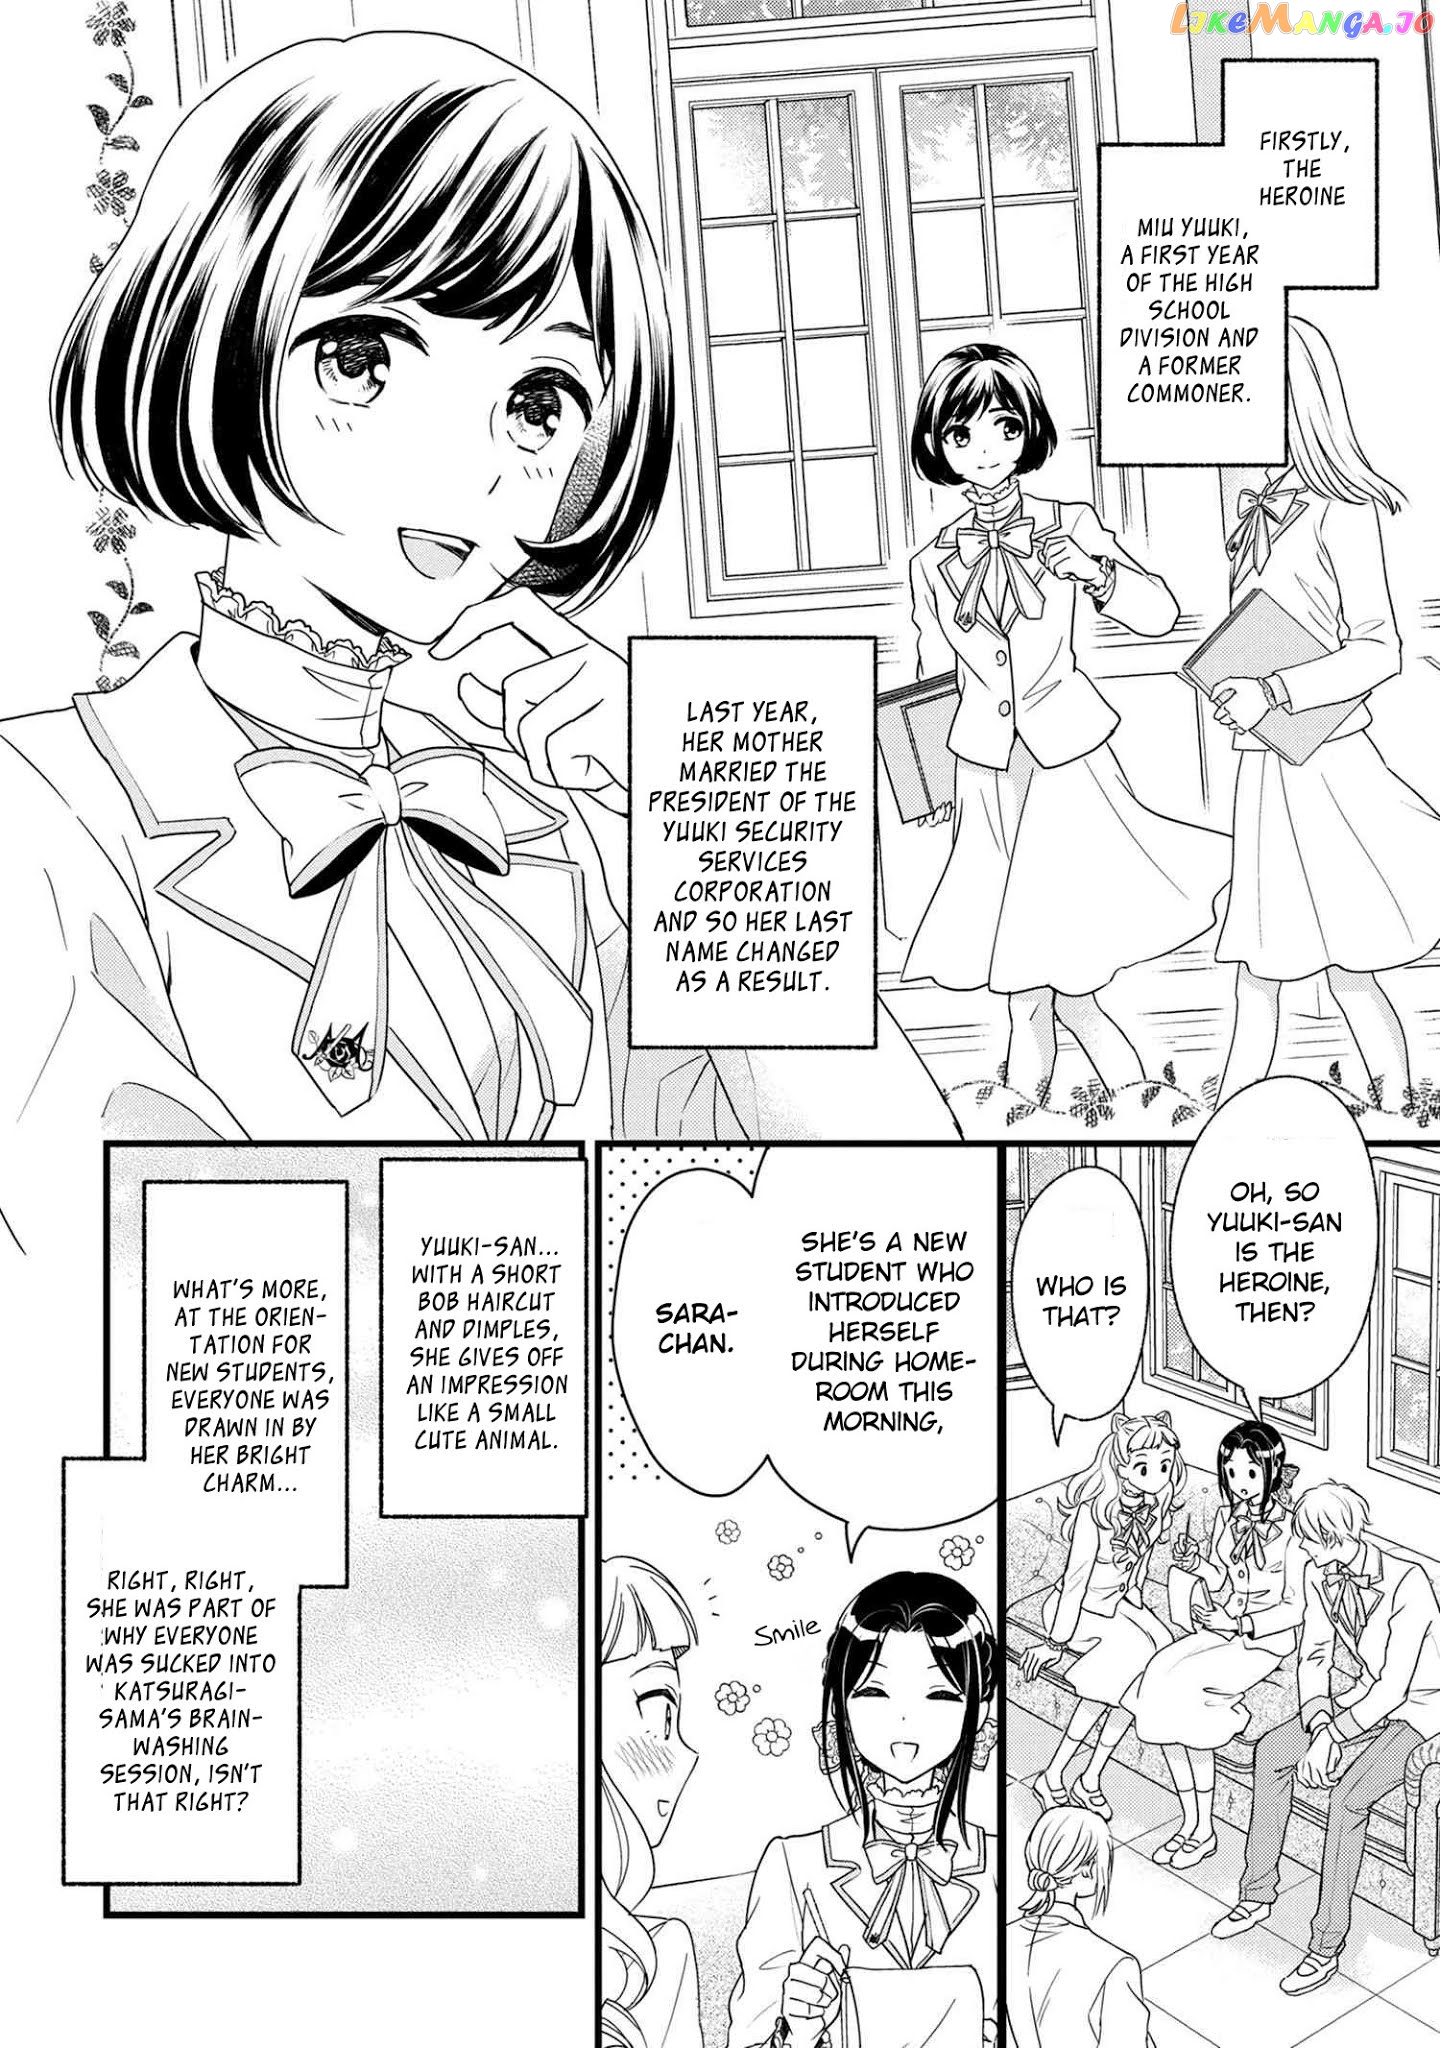 Reiko's Style: Despite Being Mistaken For A Rich Villainess, She's Actually Just Penniless chapter 3 - page 9